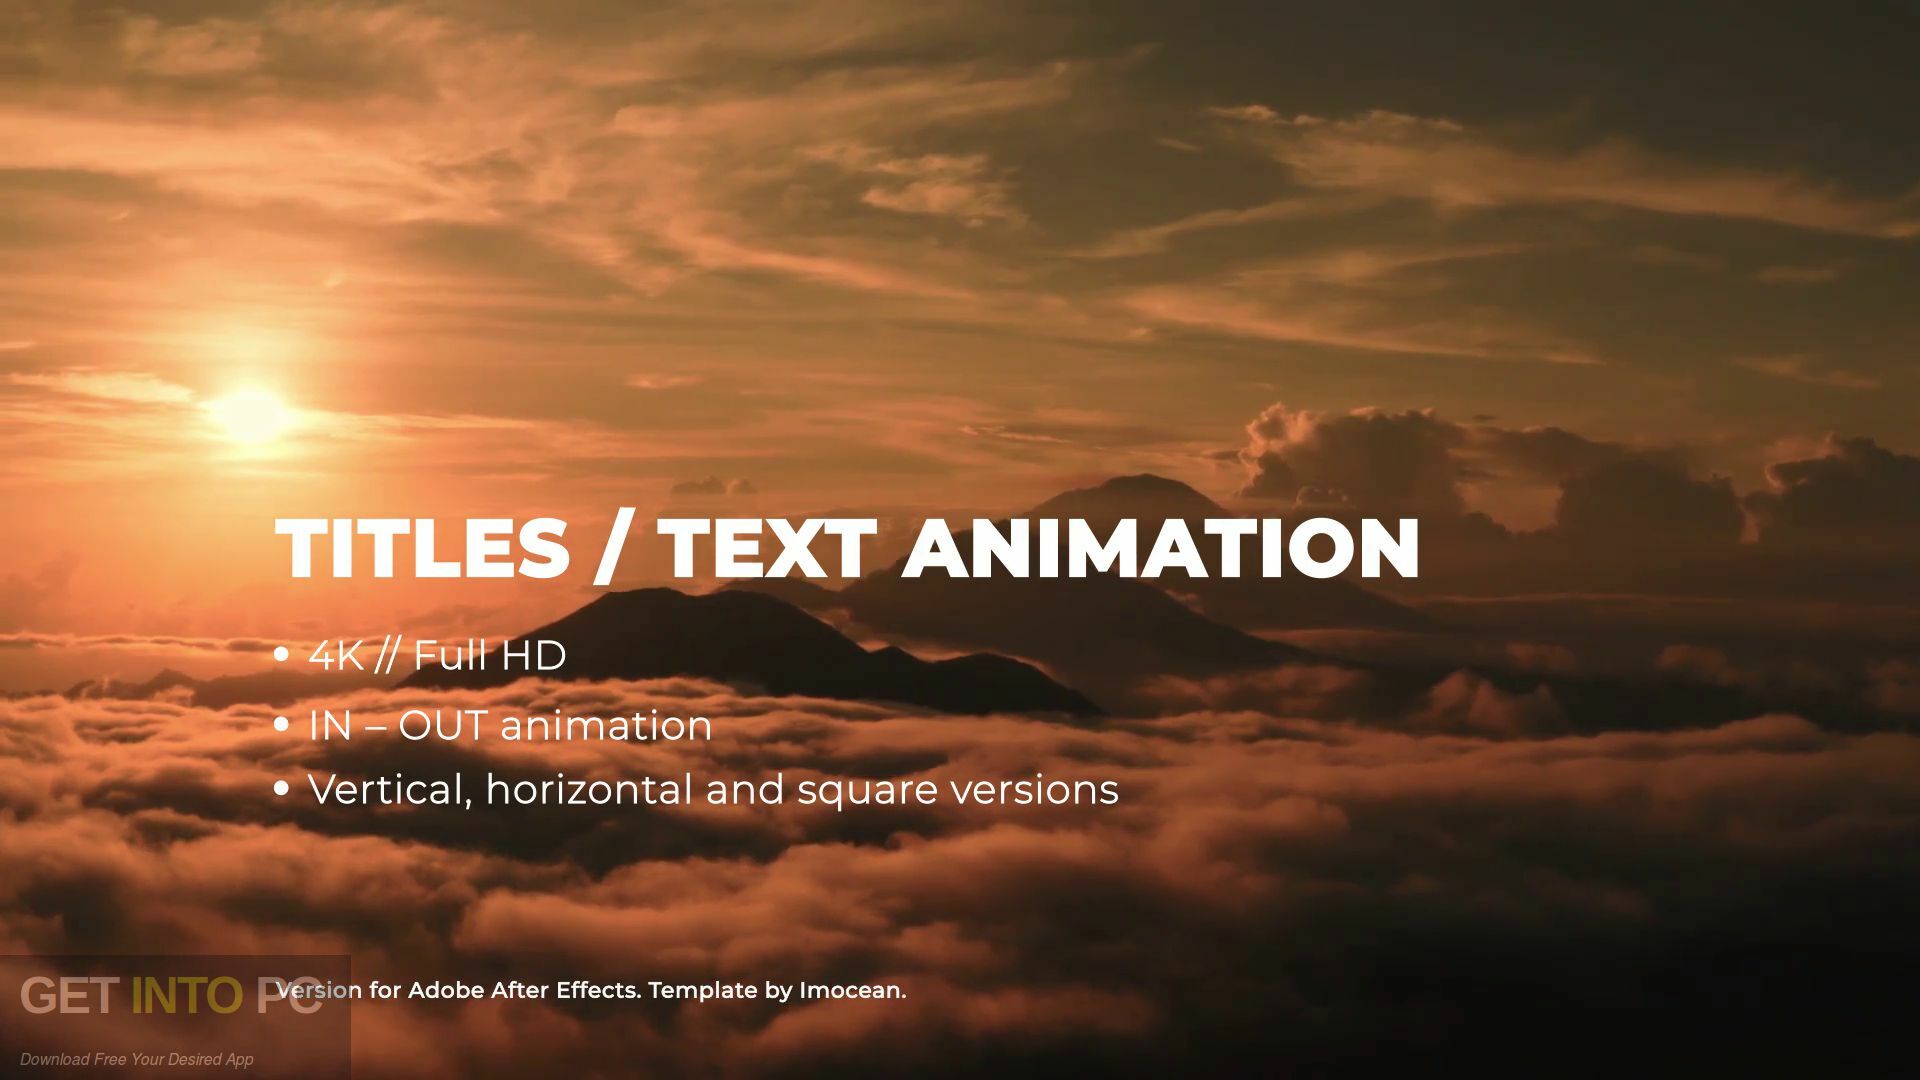 VideoHive - Titles / Text Animation [AEP] Free Download